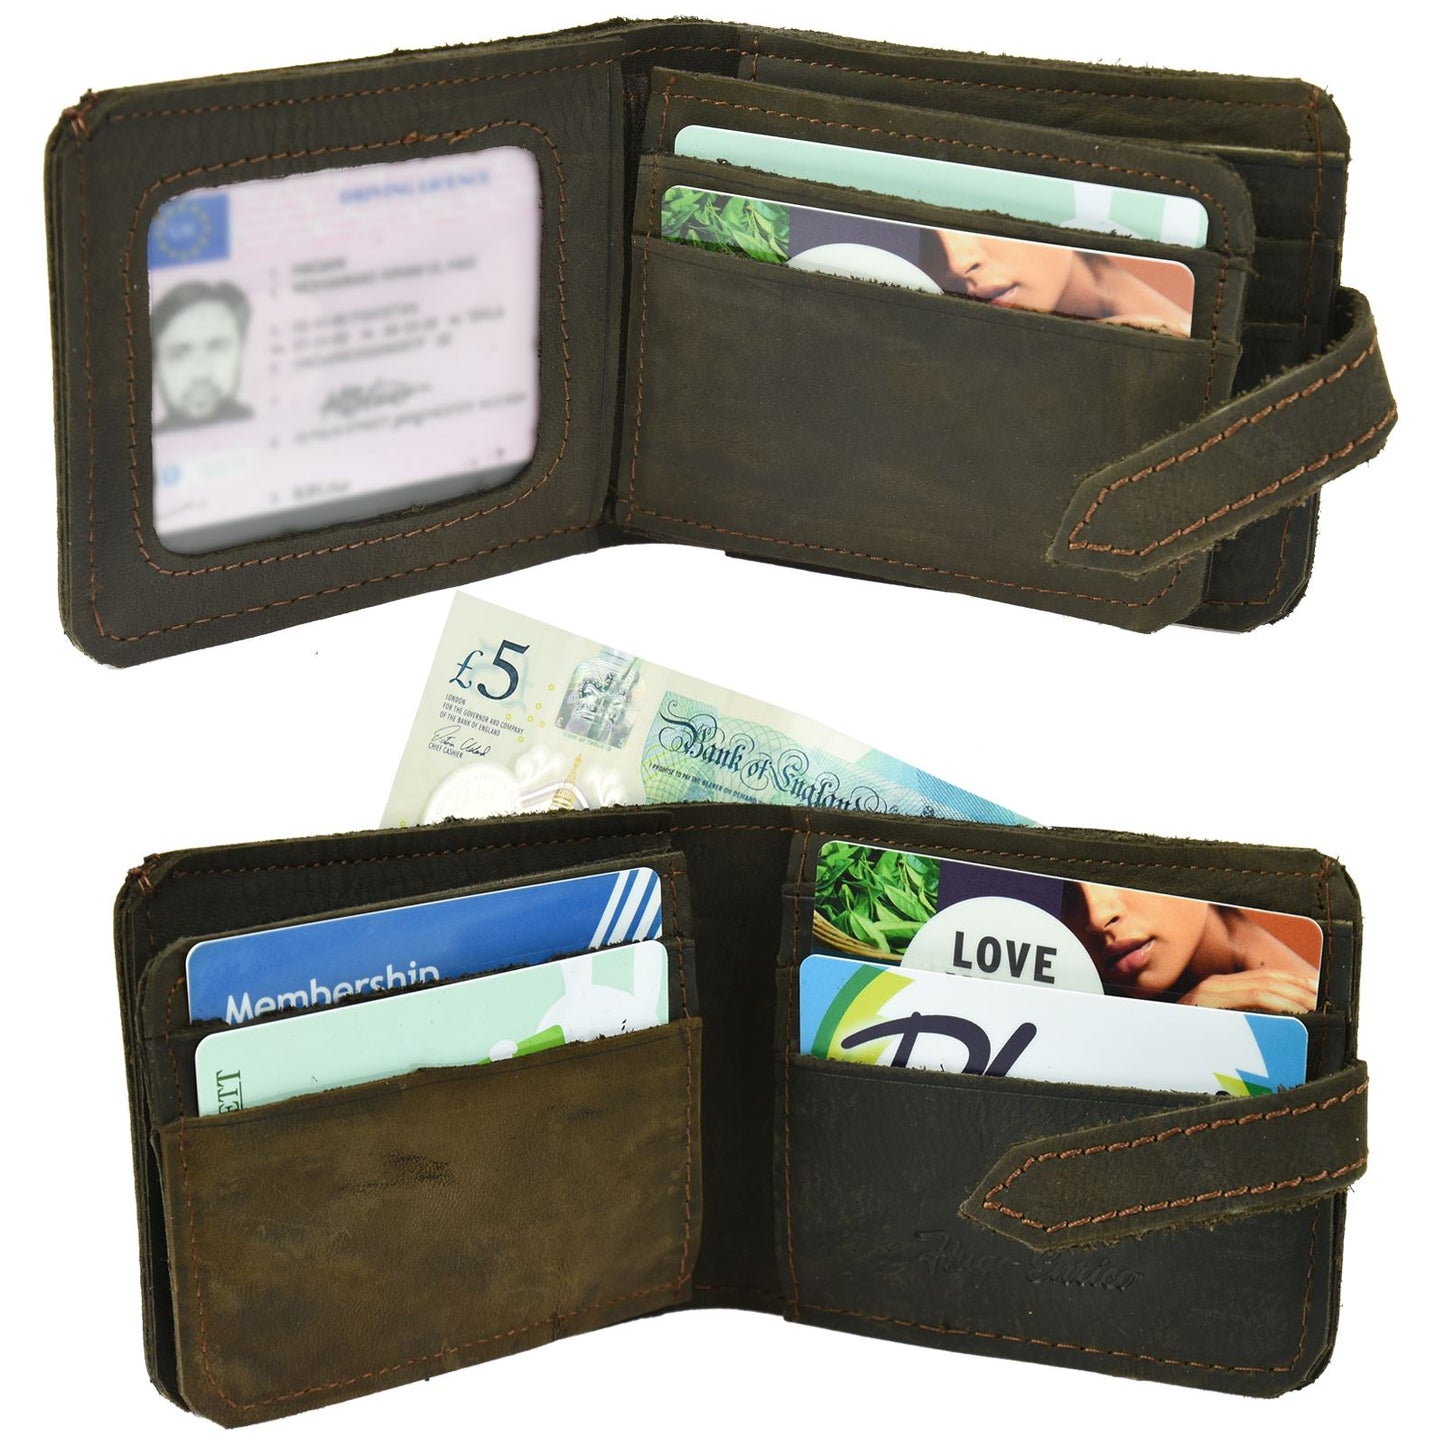 Stylish And Durable Men'S Genuine Leather Bifold Wallet